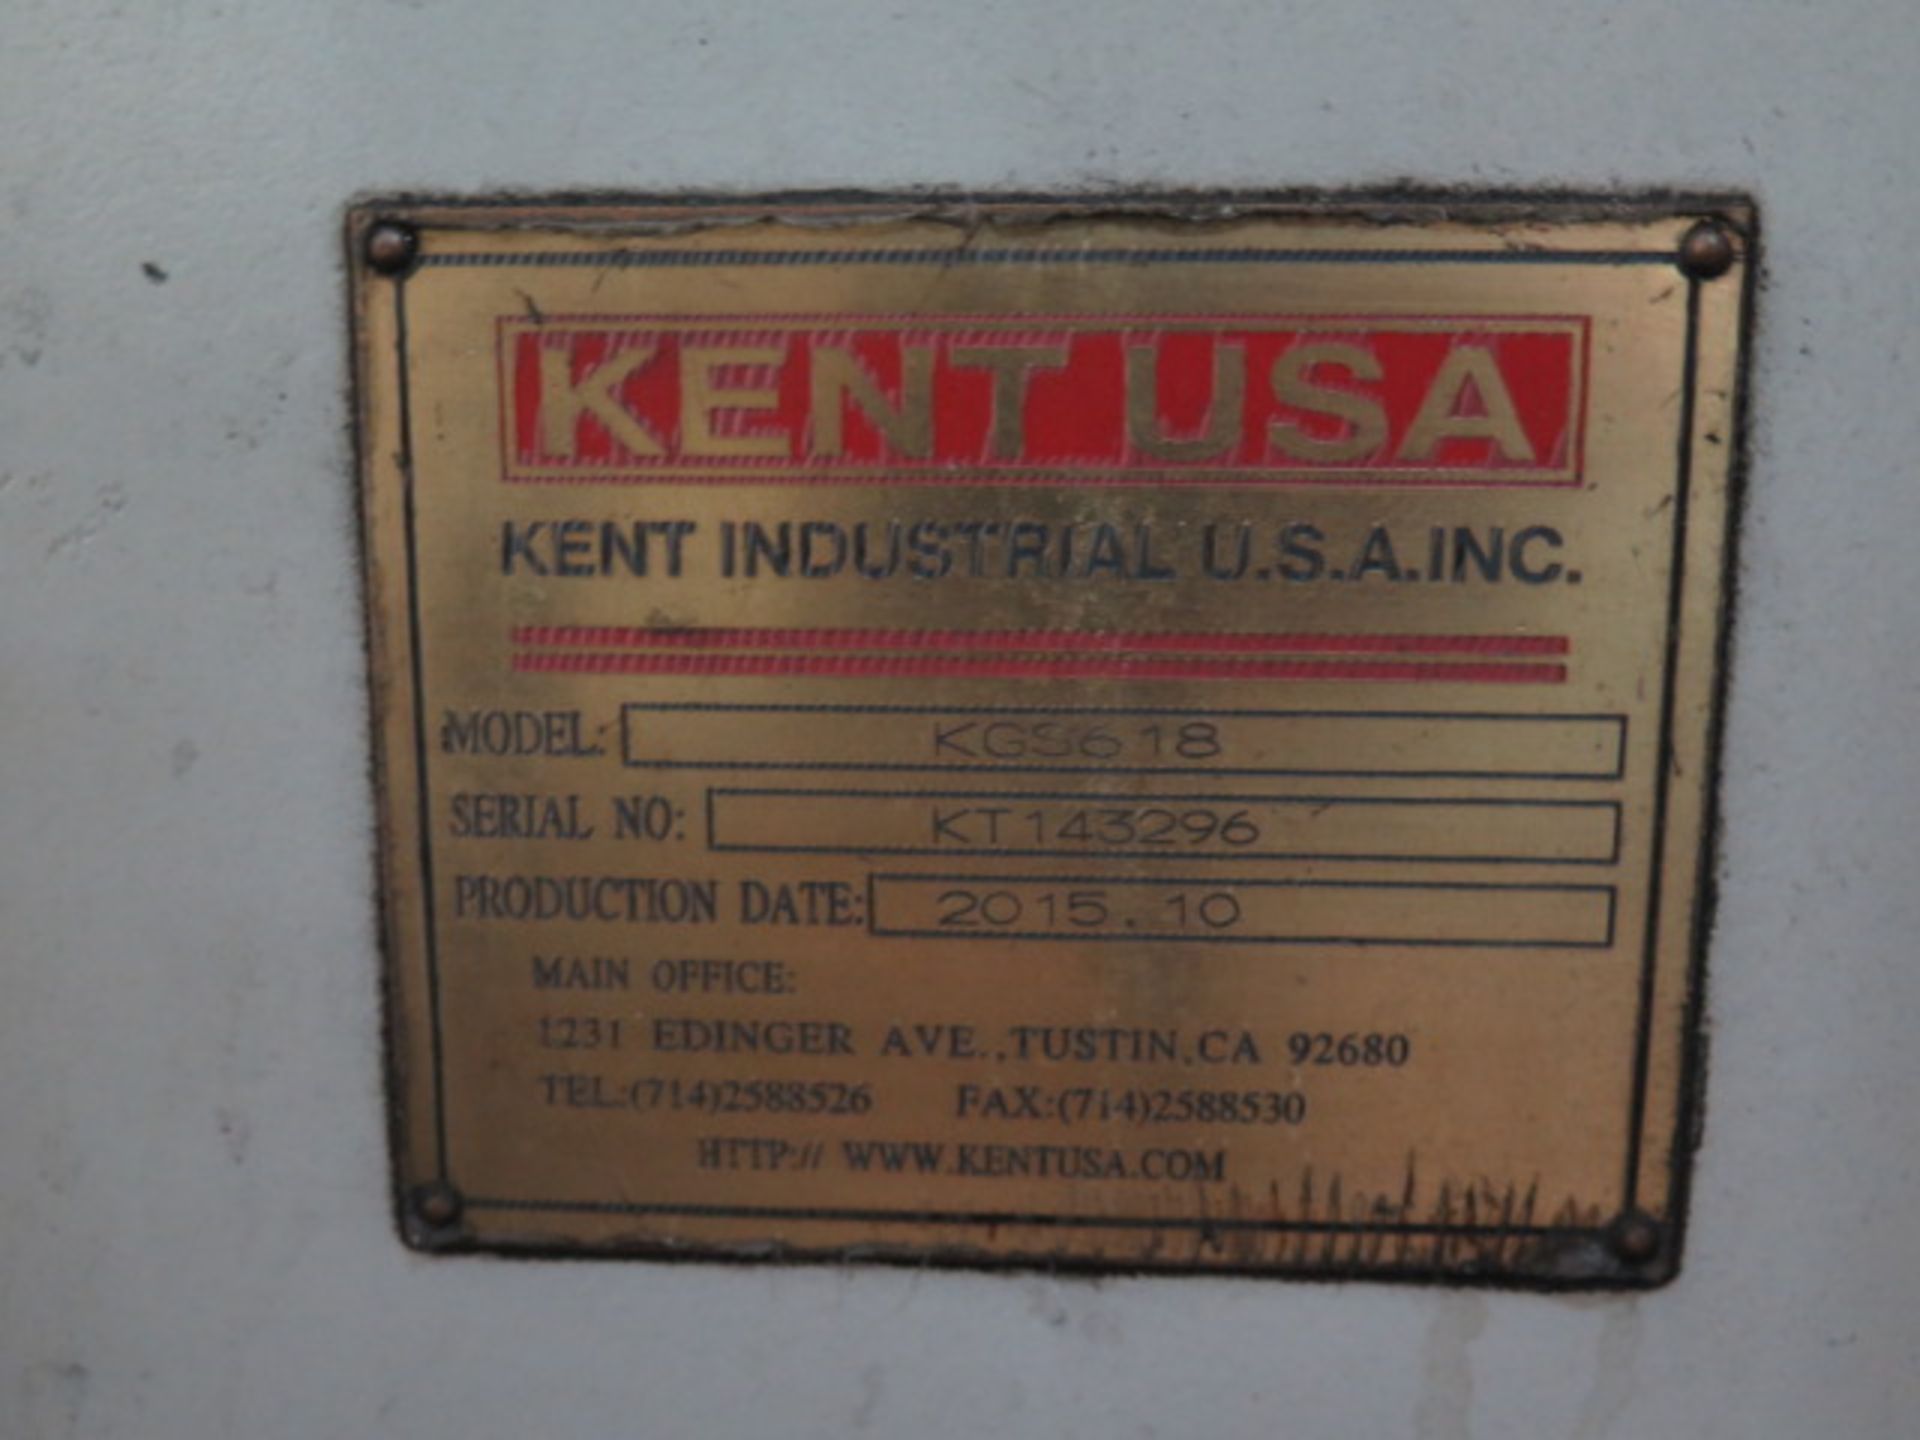 2013 Kent KGS618 6” x 18” Surface Grinder s/n KT143296 w/ 6” x 18” Magnetic Chuck (SOLD AS-IS - NO - Image 14 of 15